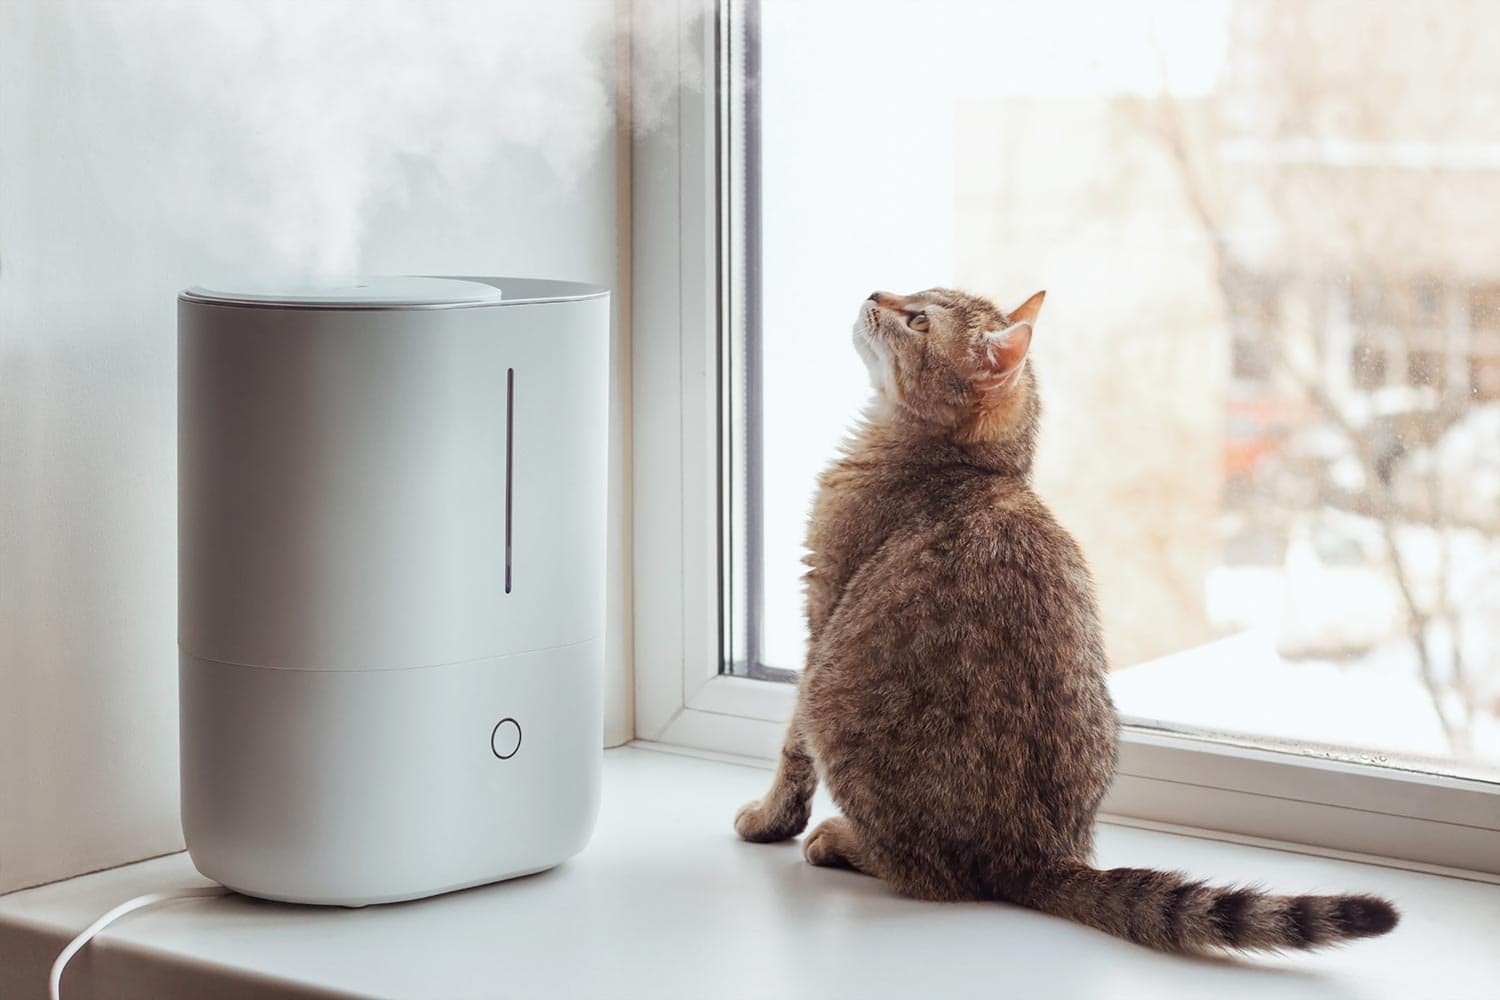 A young tabby cat sits on the windowsill and looks at the steam from the white air humidifier